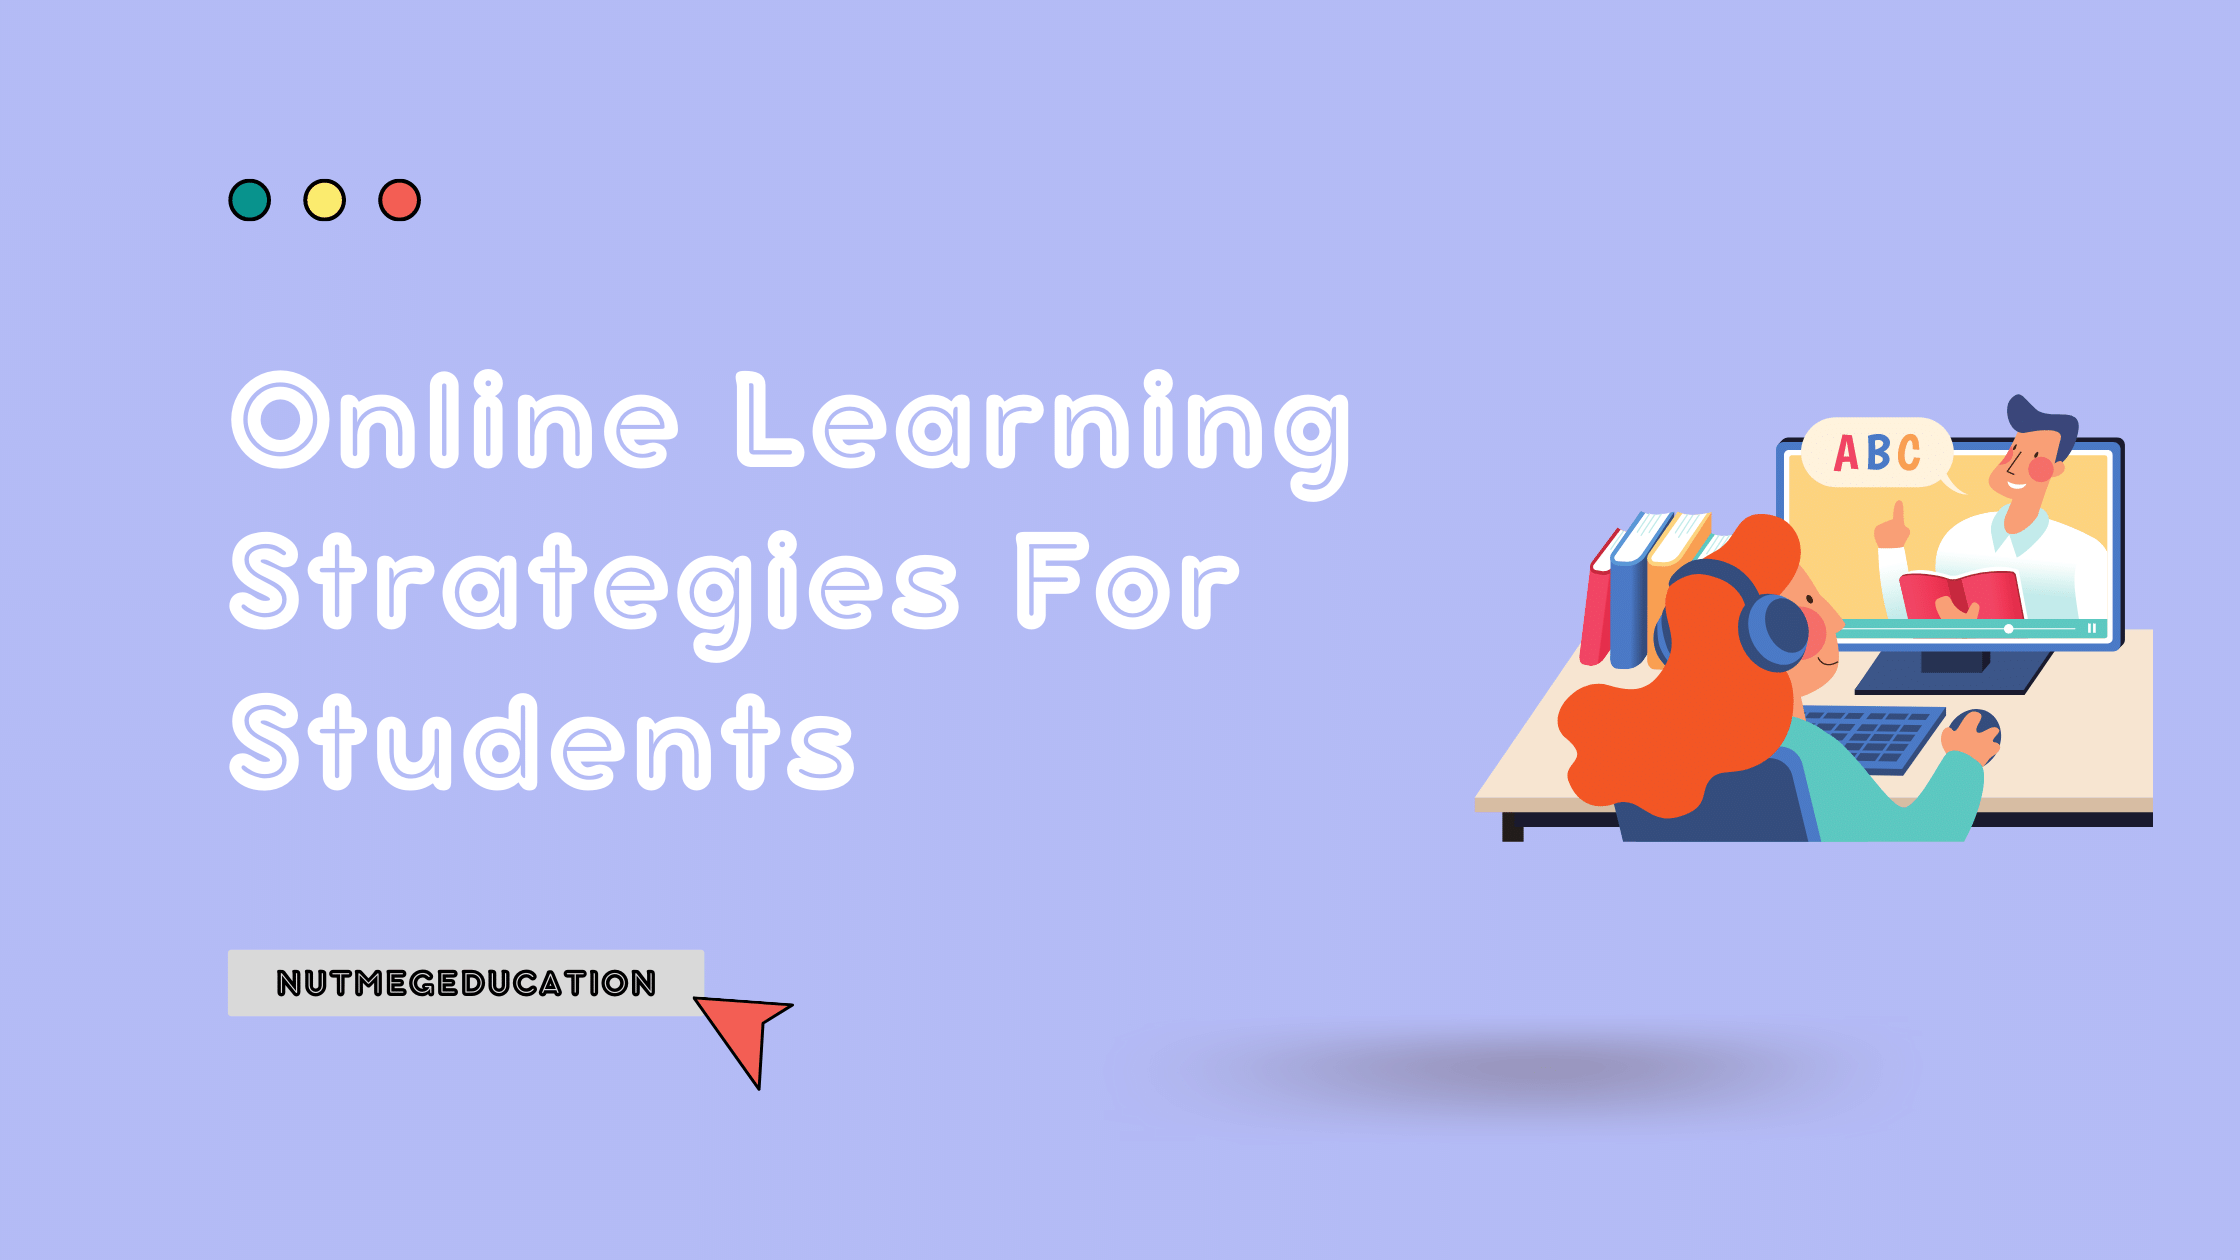 Online Learning Strategies For Students - NutMegEducation